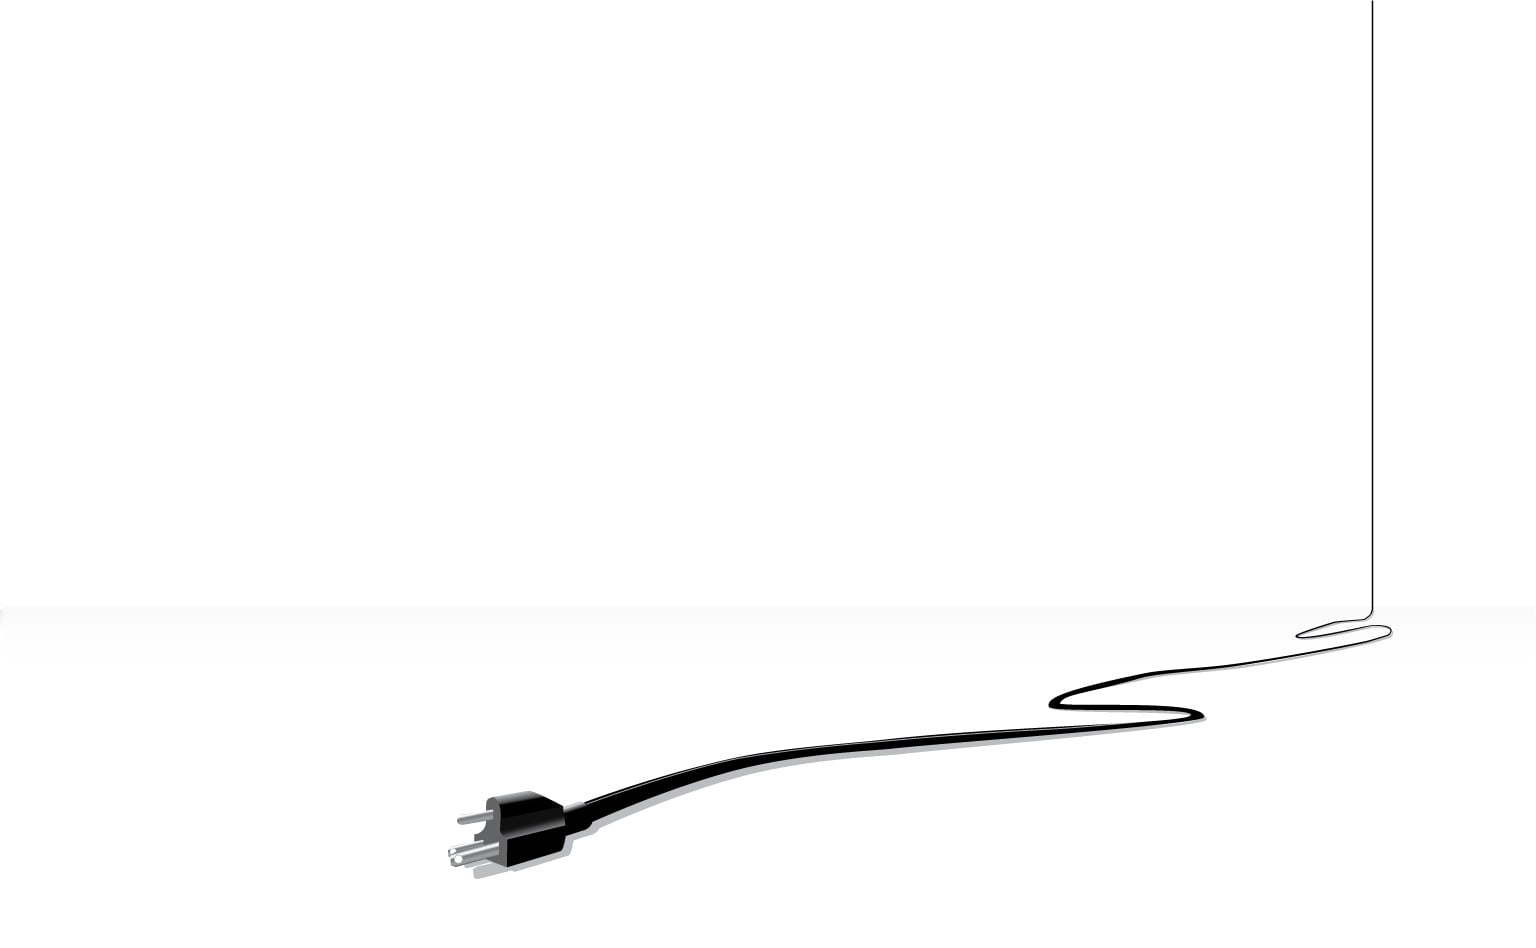 Black power cable, electricity, power cord, simple